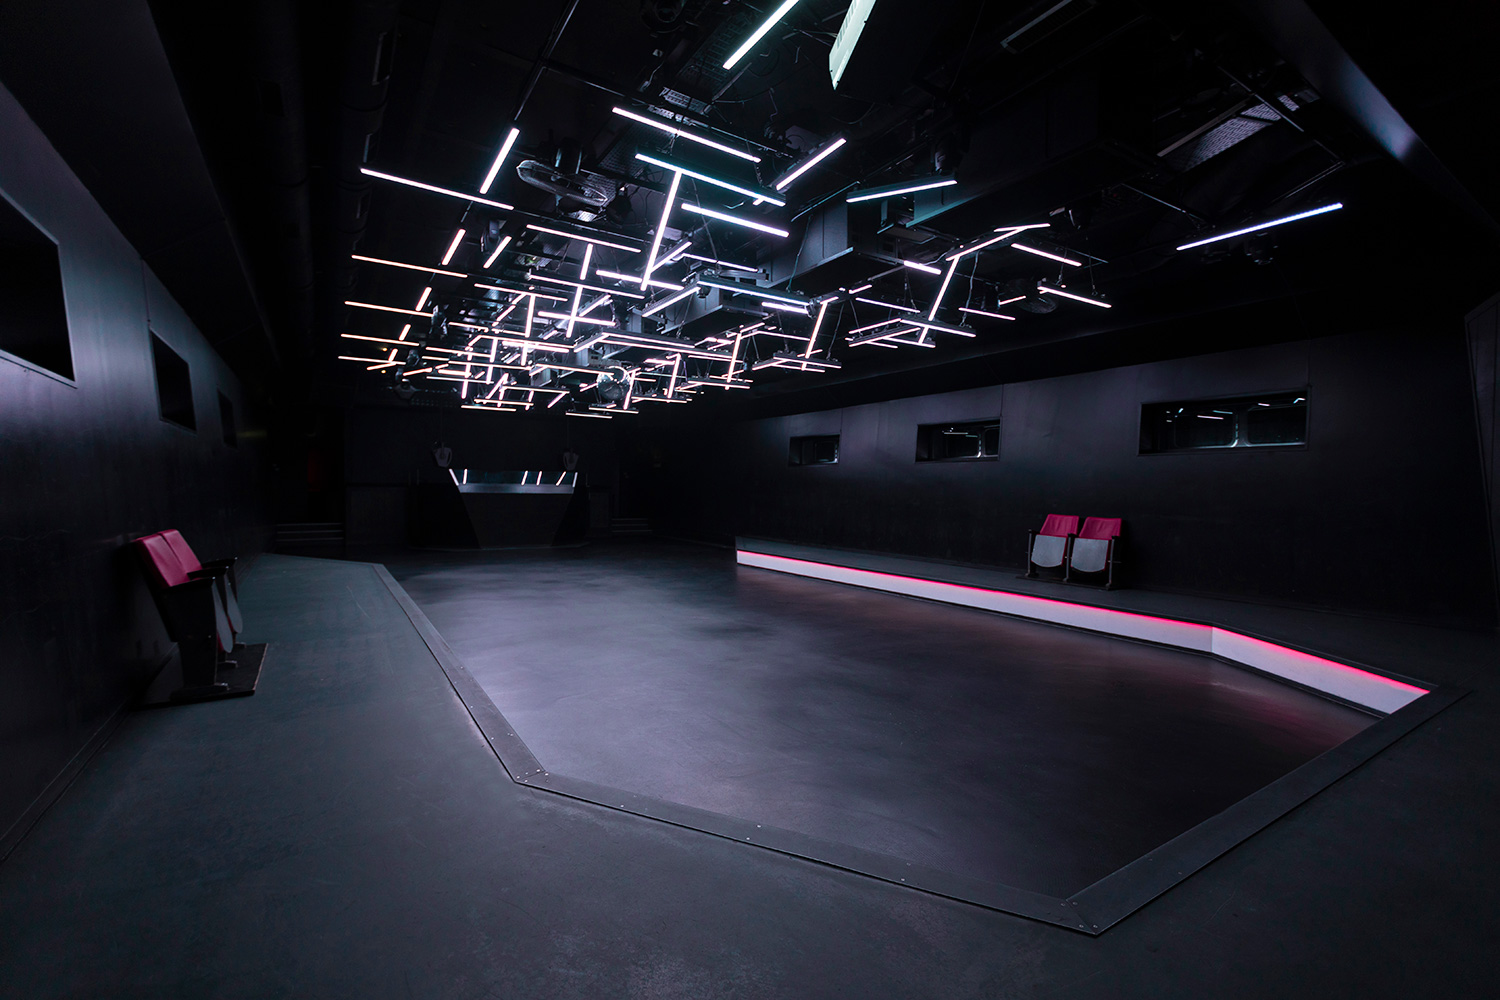 WSDG was in charge of the famous EDM nightclub Nordstern in Basel, Switzerland sound isolation, acoustics, and audio design inside the nightclub. Dancefloor View.